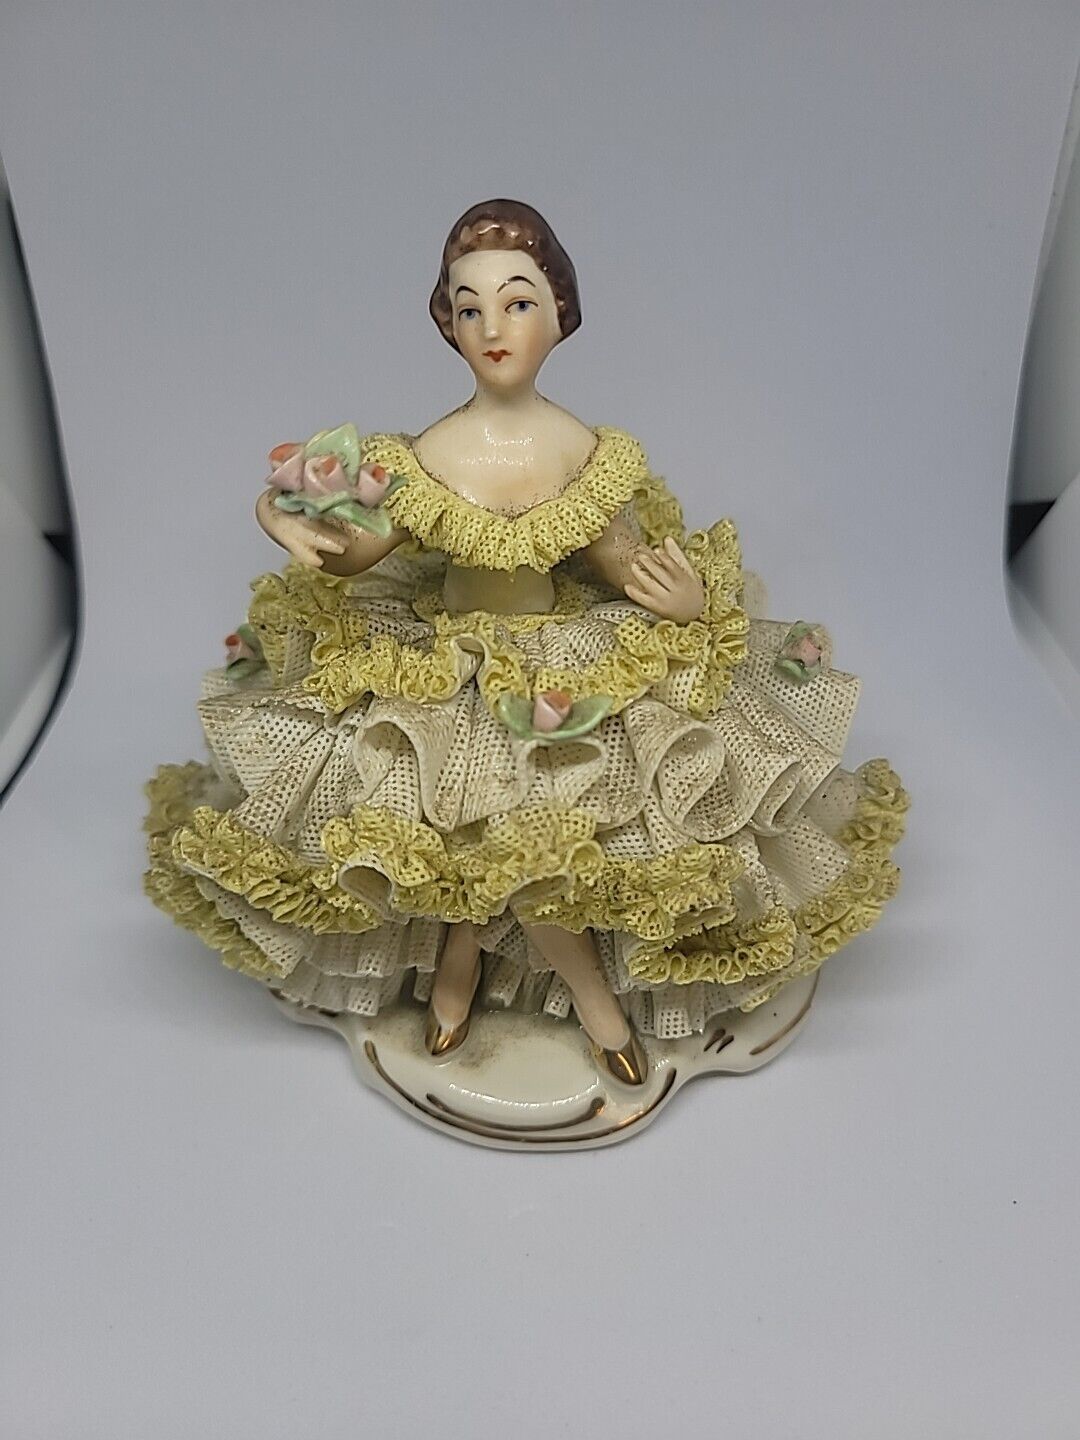 Dresden porcelain lace figurine Germany Stamped Antique Yellow Dress Woman 4.5